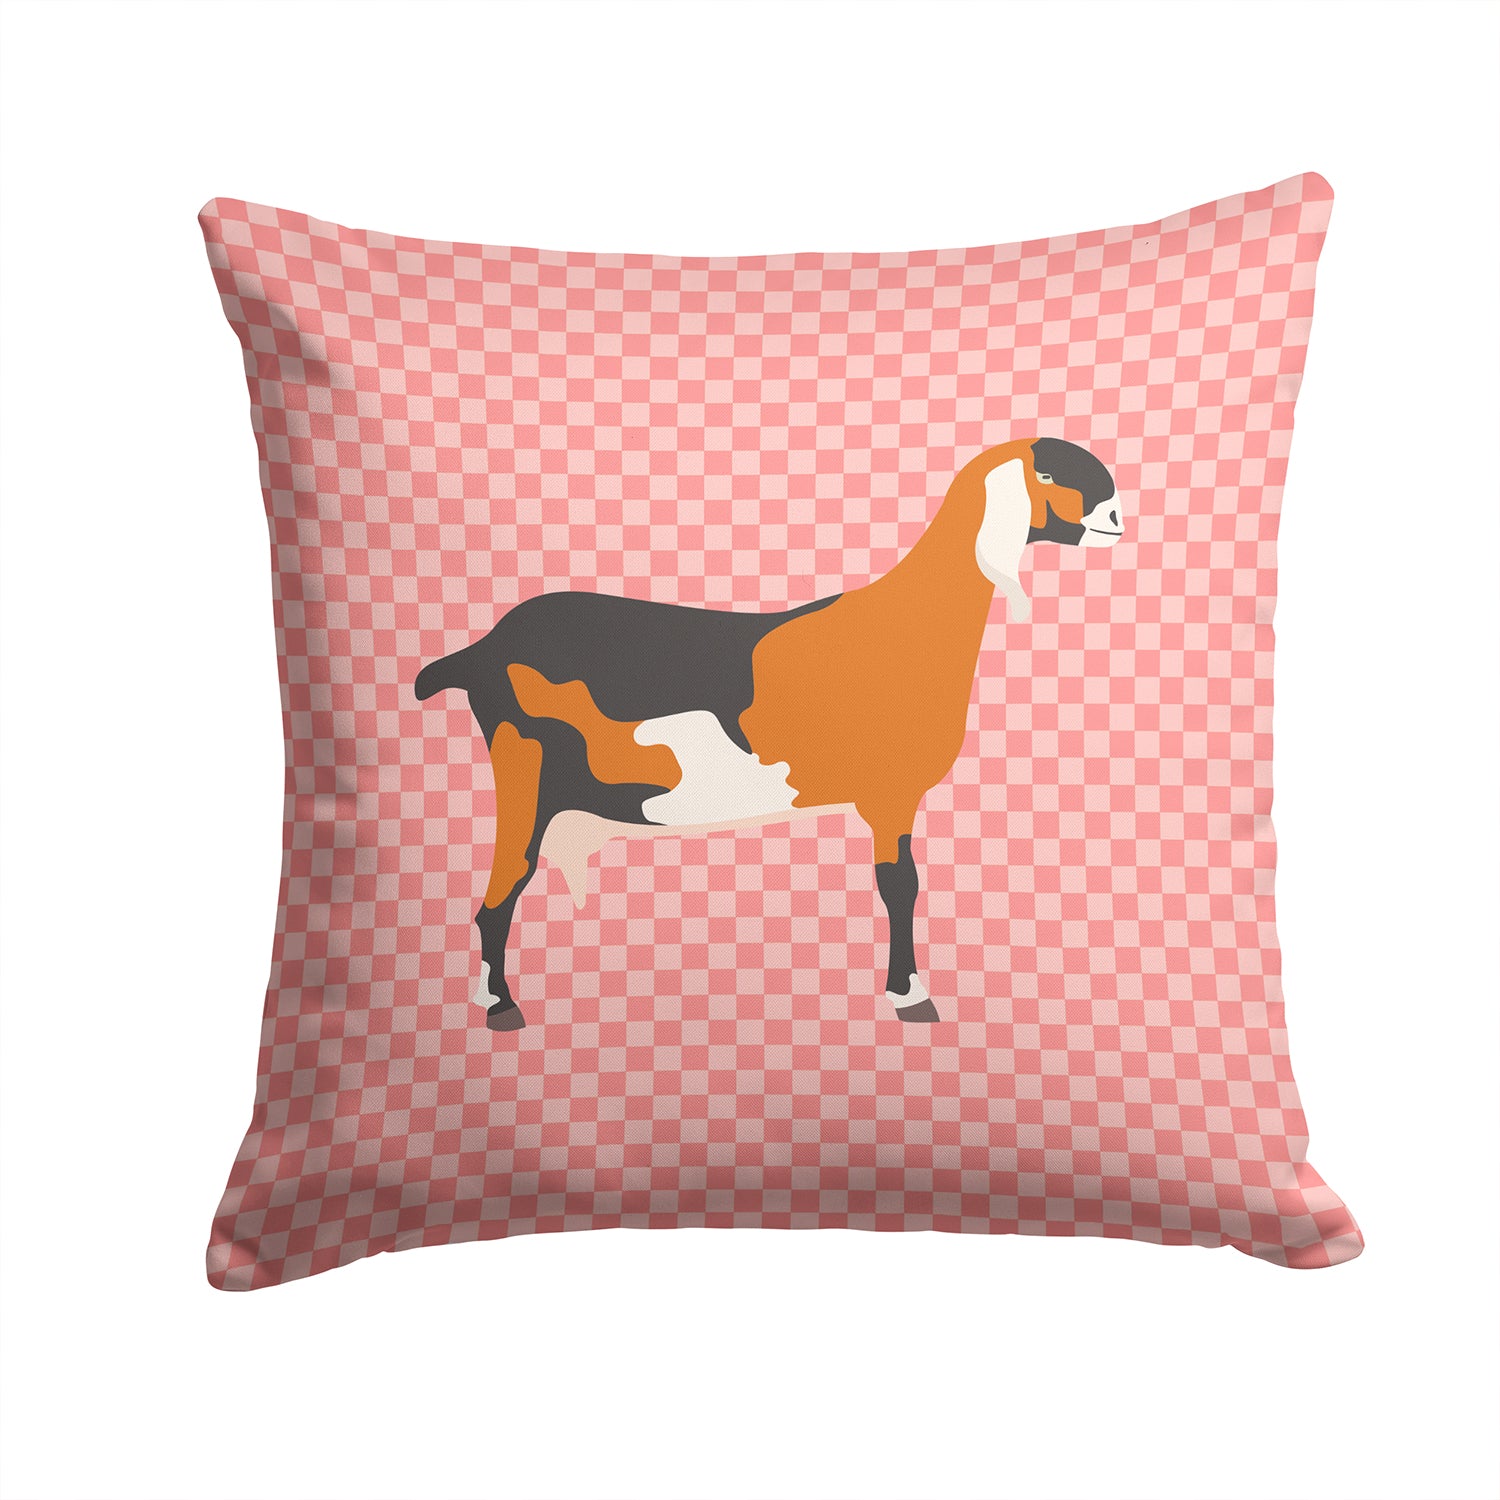 Anglo-nubian Nubian Goat Pink Check Fabric Decorative Pillow BB7883PW1414 - the-store.com